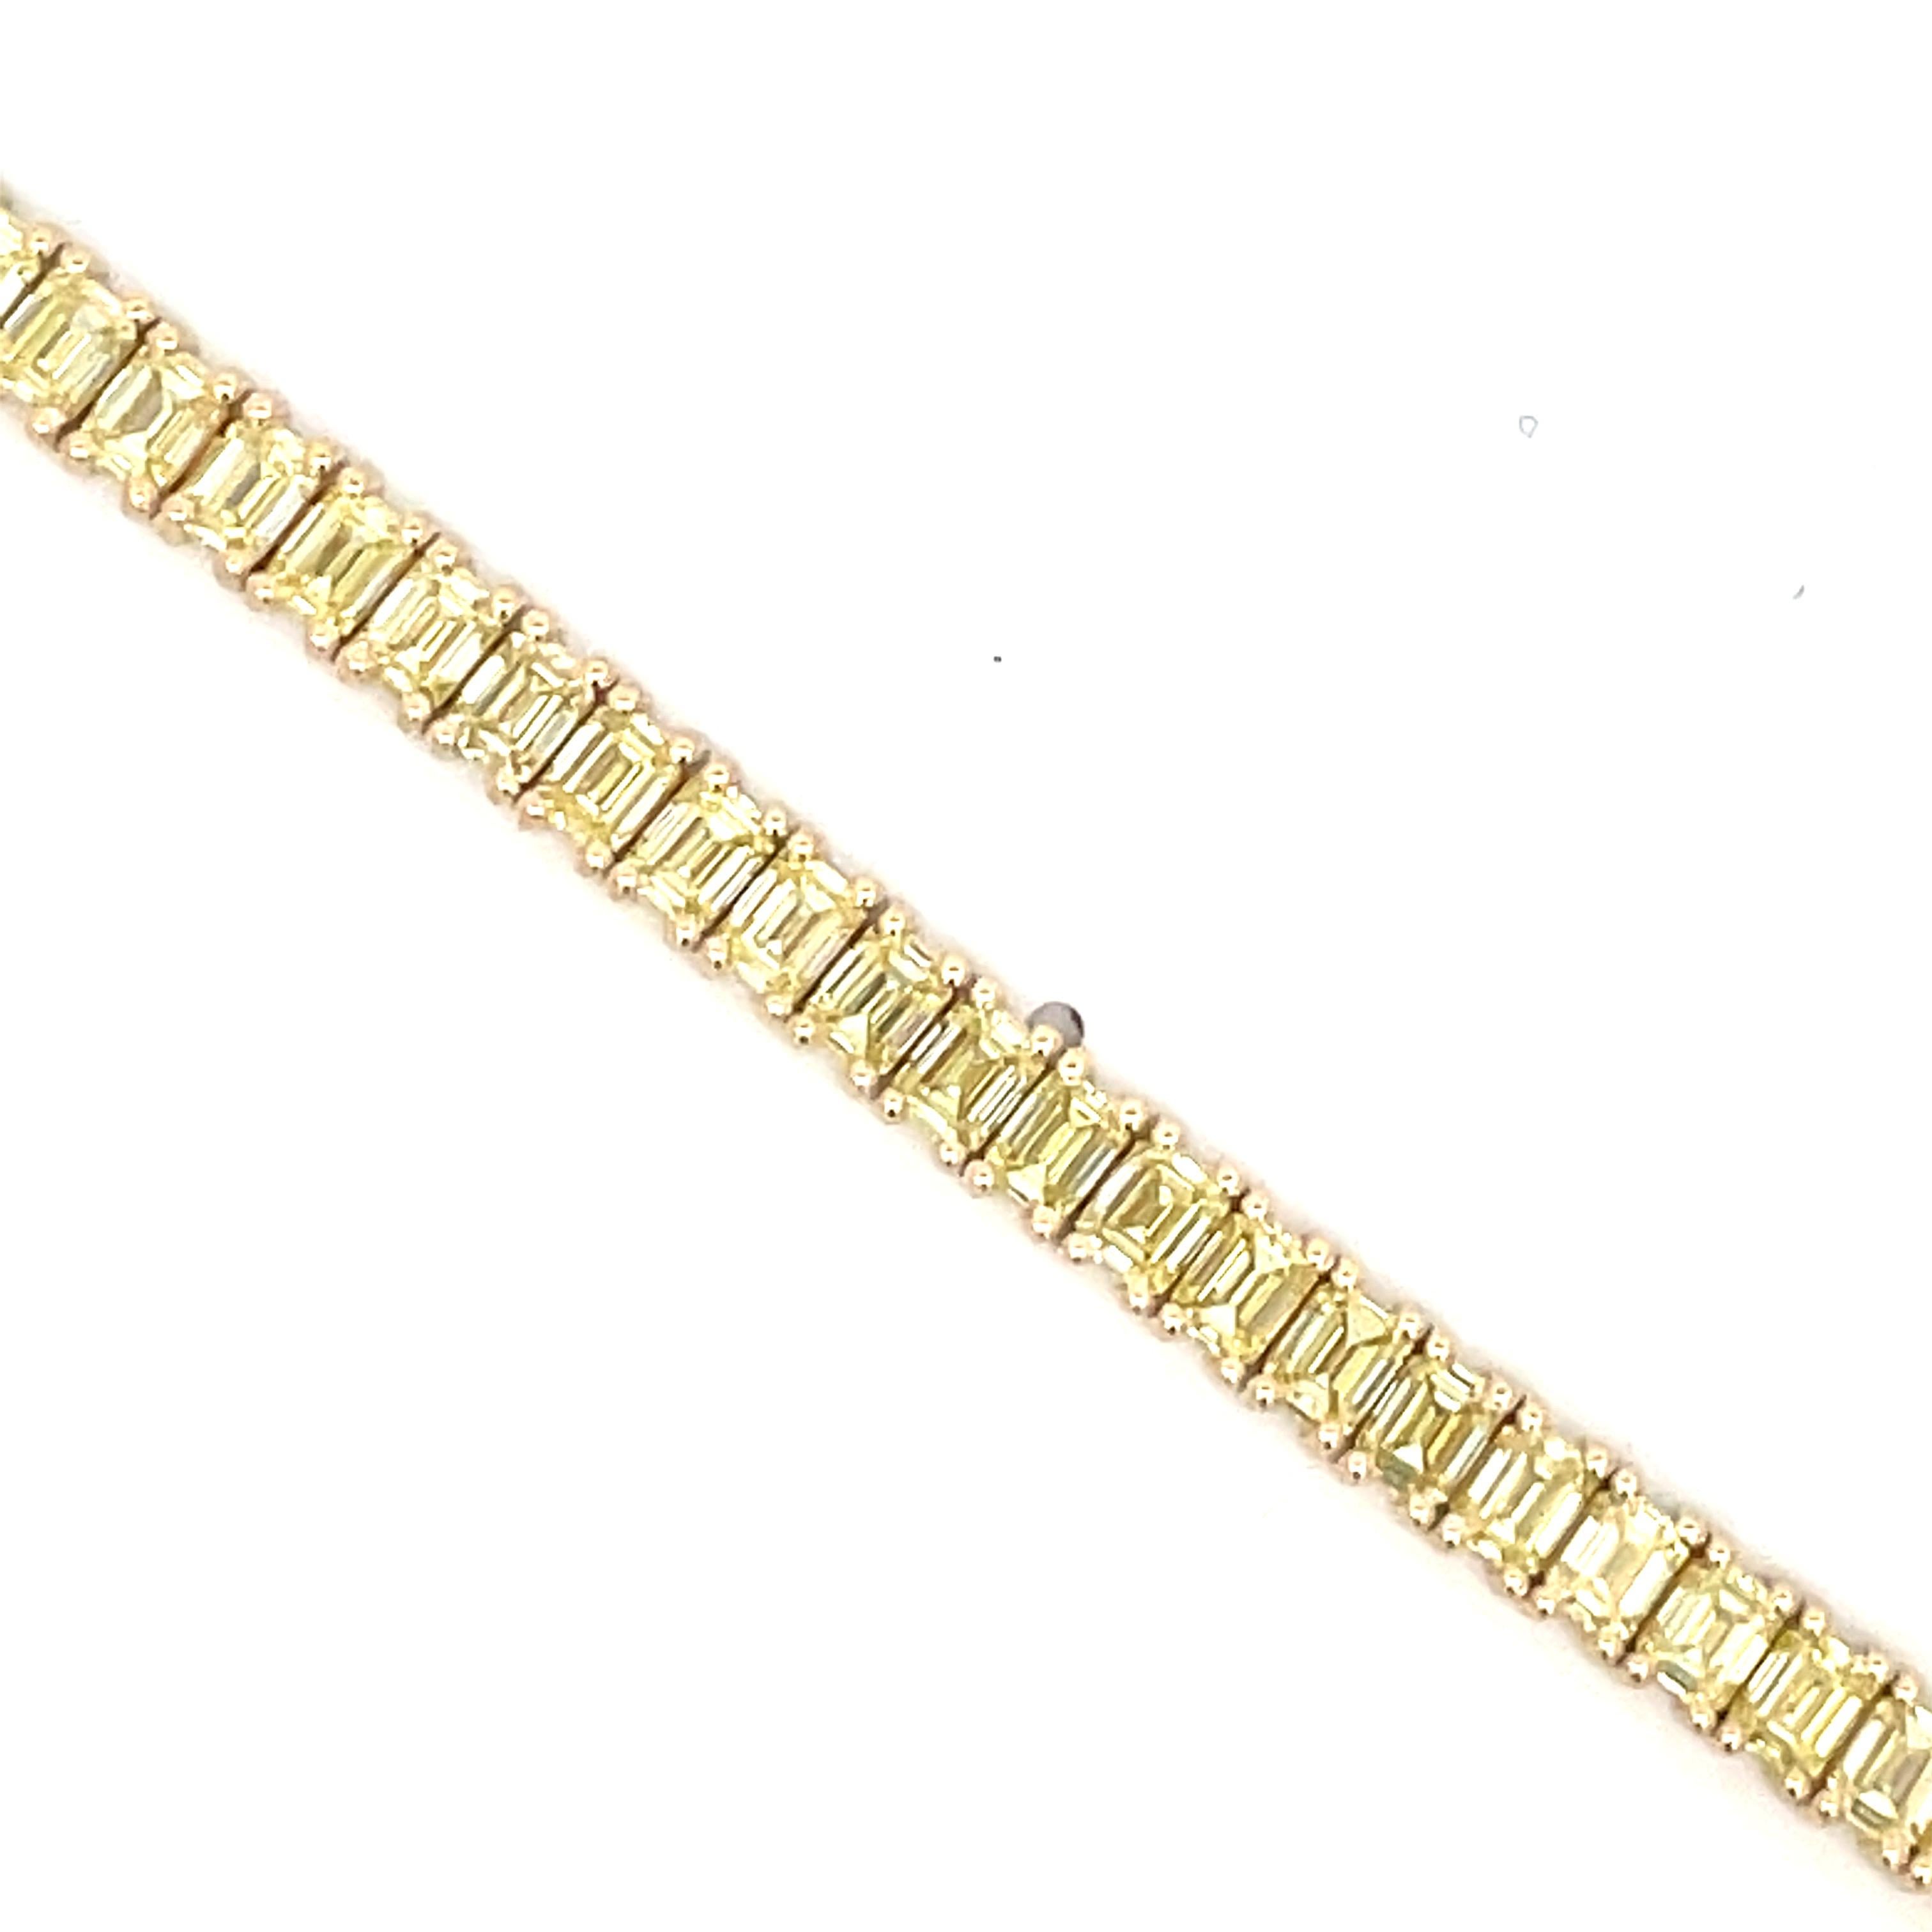 Fancy Yellow Emerald Cut Yellow Diamond Tennis Bracelet 12.55 Carats 14 KT Gold In New Condition For Sale In New York, NY